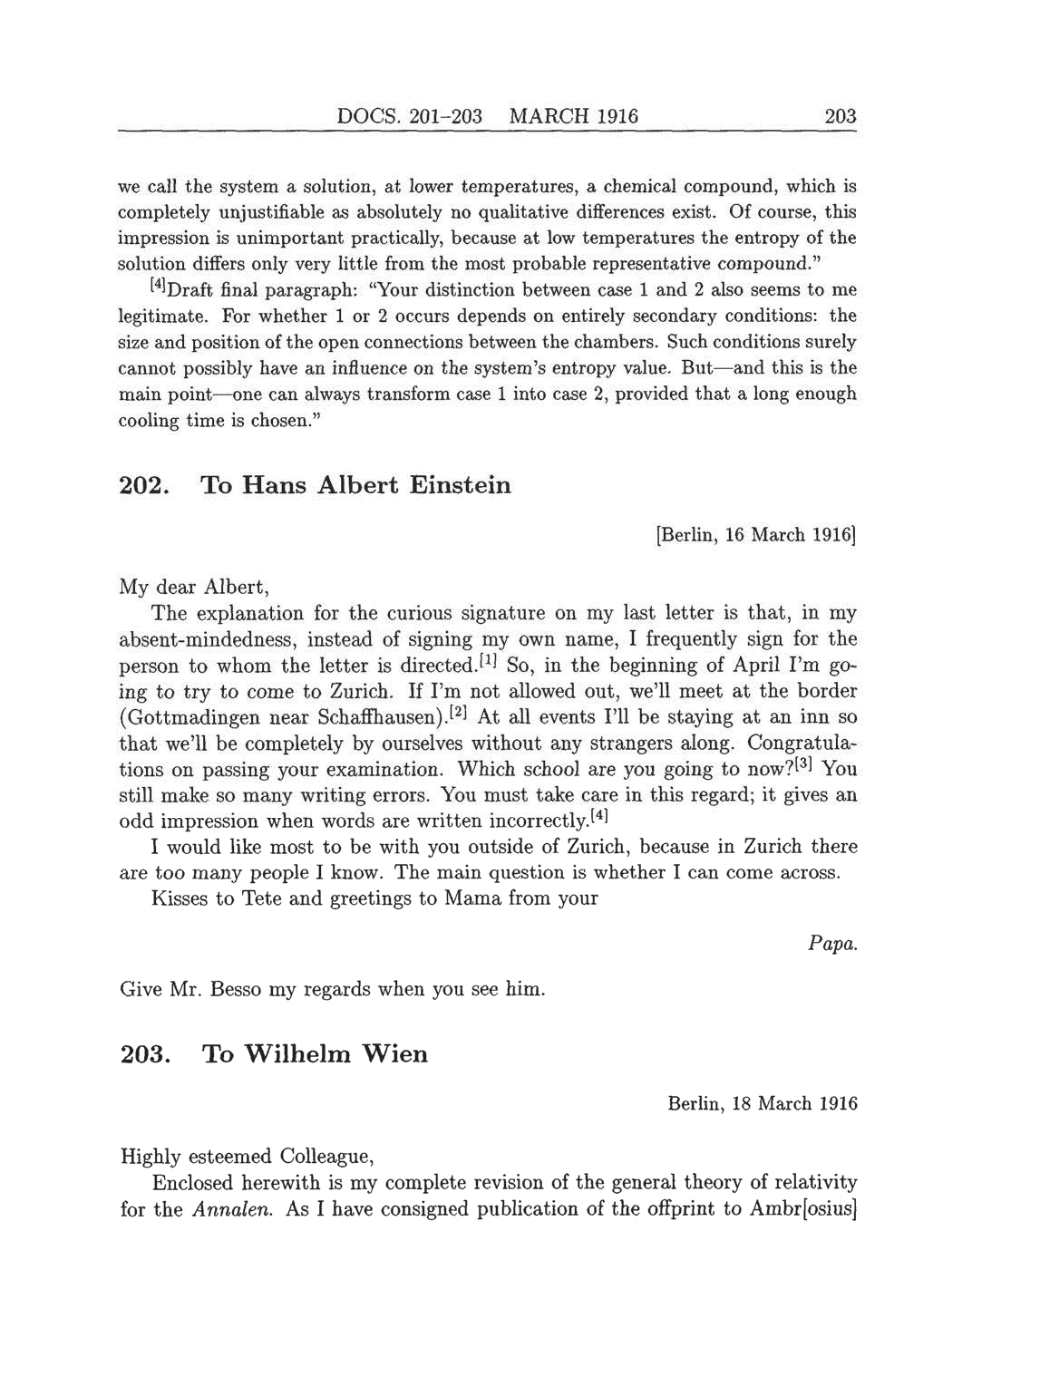 Volume 8: The Berlin Years: Correspondence, 1914-1918 (English translation supplement) page 203